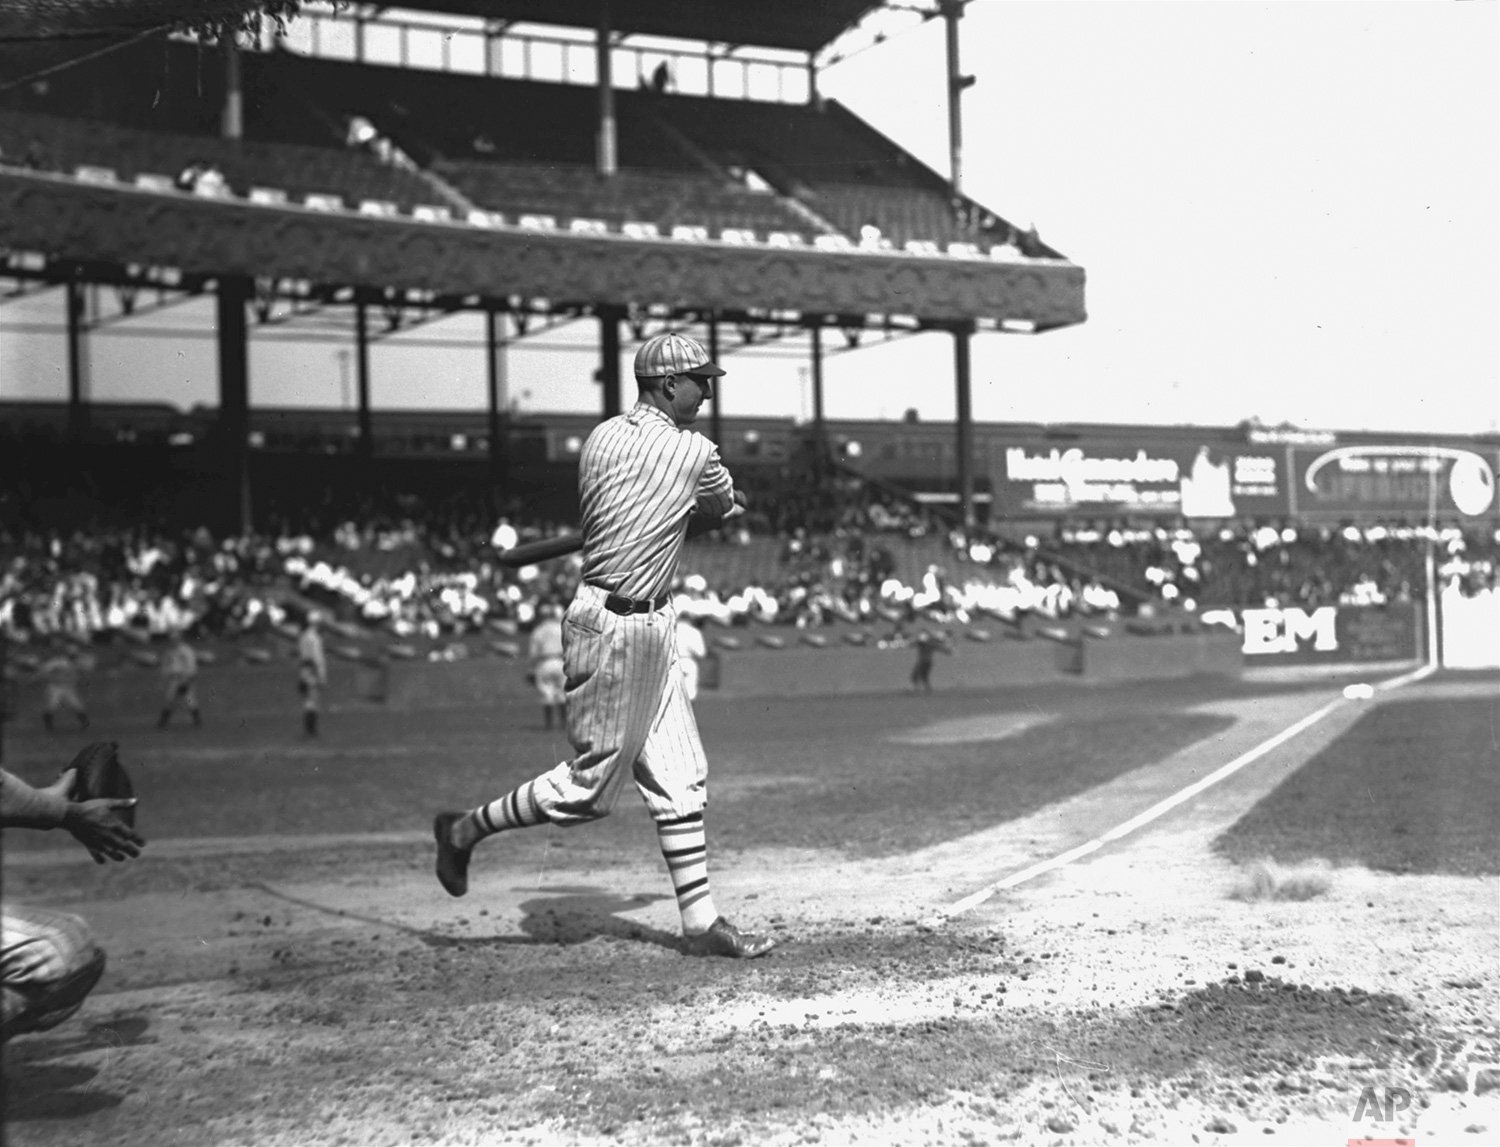  George "Highpockets" Kelly, New York Giants first baseman, at bat, 1922.  He was elected to the Hall of Fame, 1973. (AP Photo) 